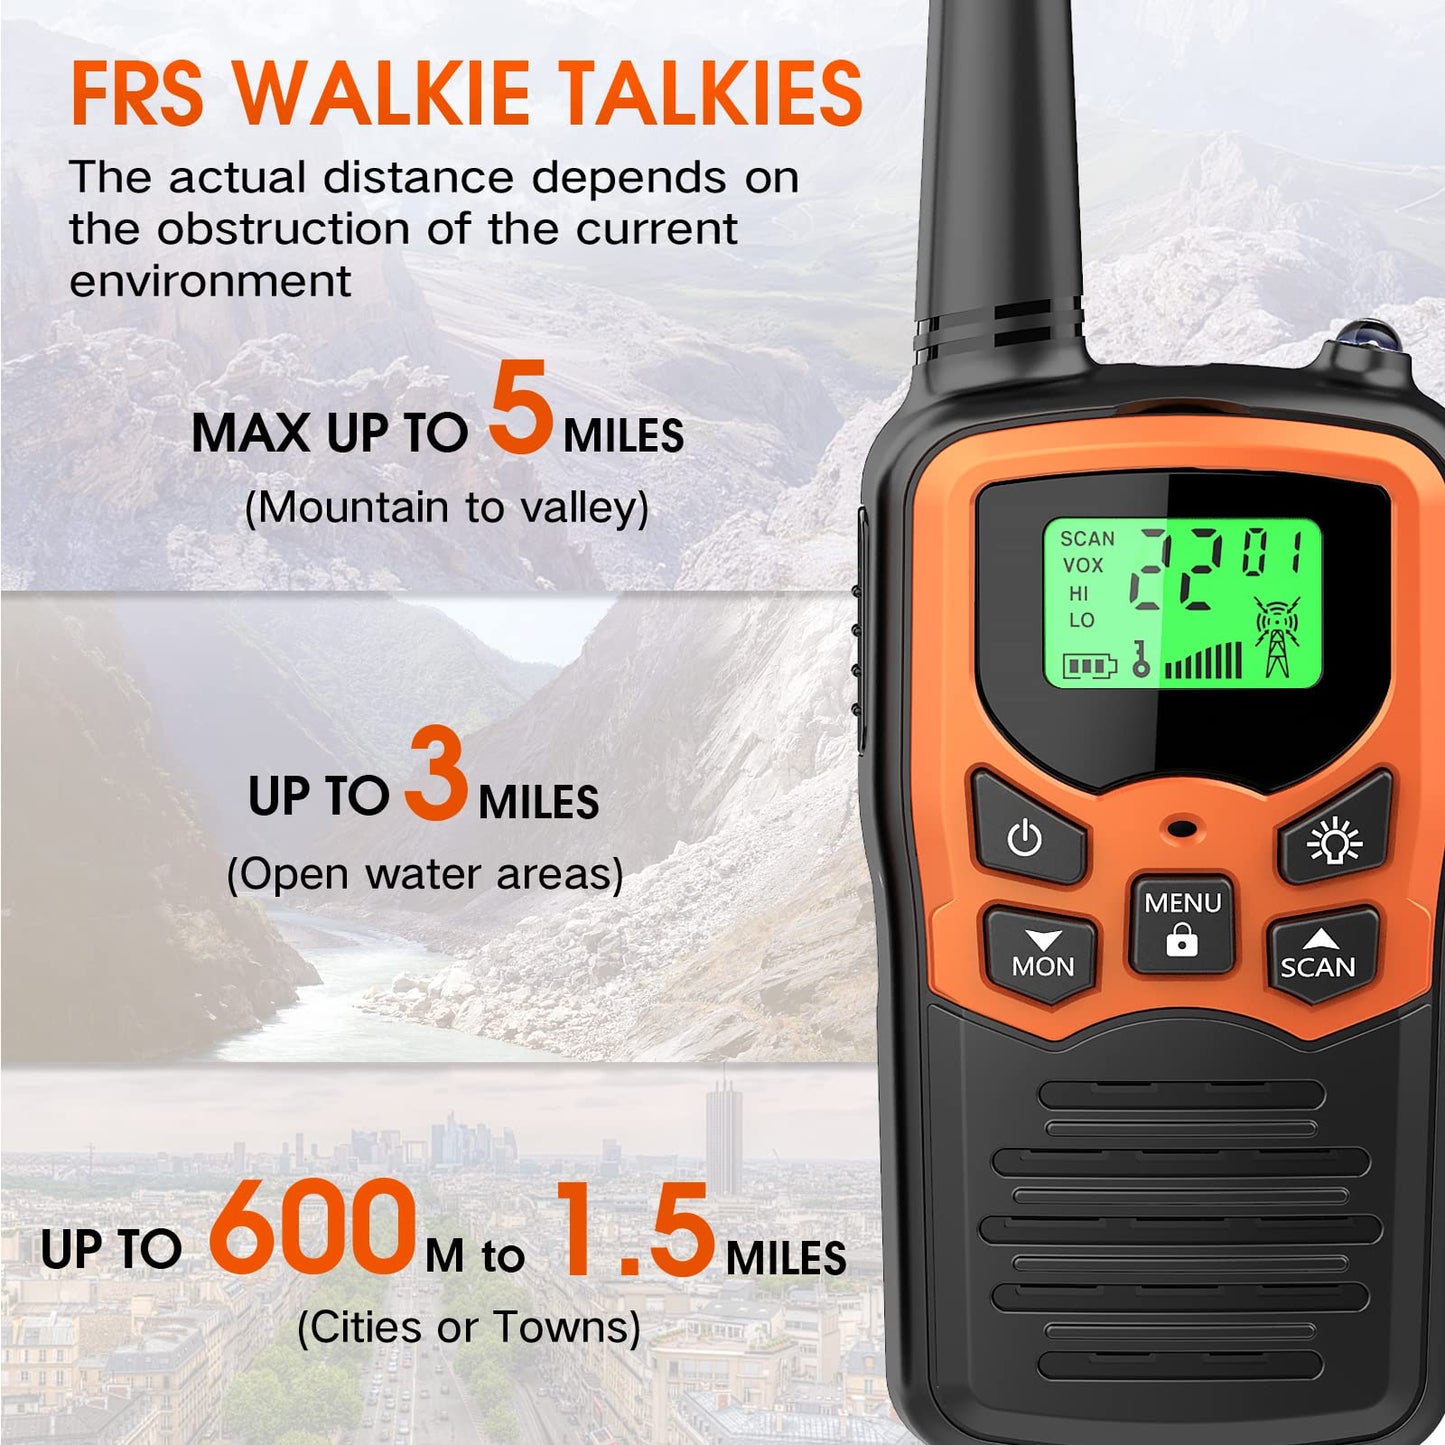 Walkie Talkies with 22 FRS Channels MOICO Walkie Talkies for Adults with LED Flashlight VOX Scan LCD Display, Long Range Family Radios for Hiking Camping Trip (Orange, 4 Pack)